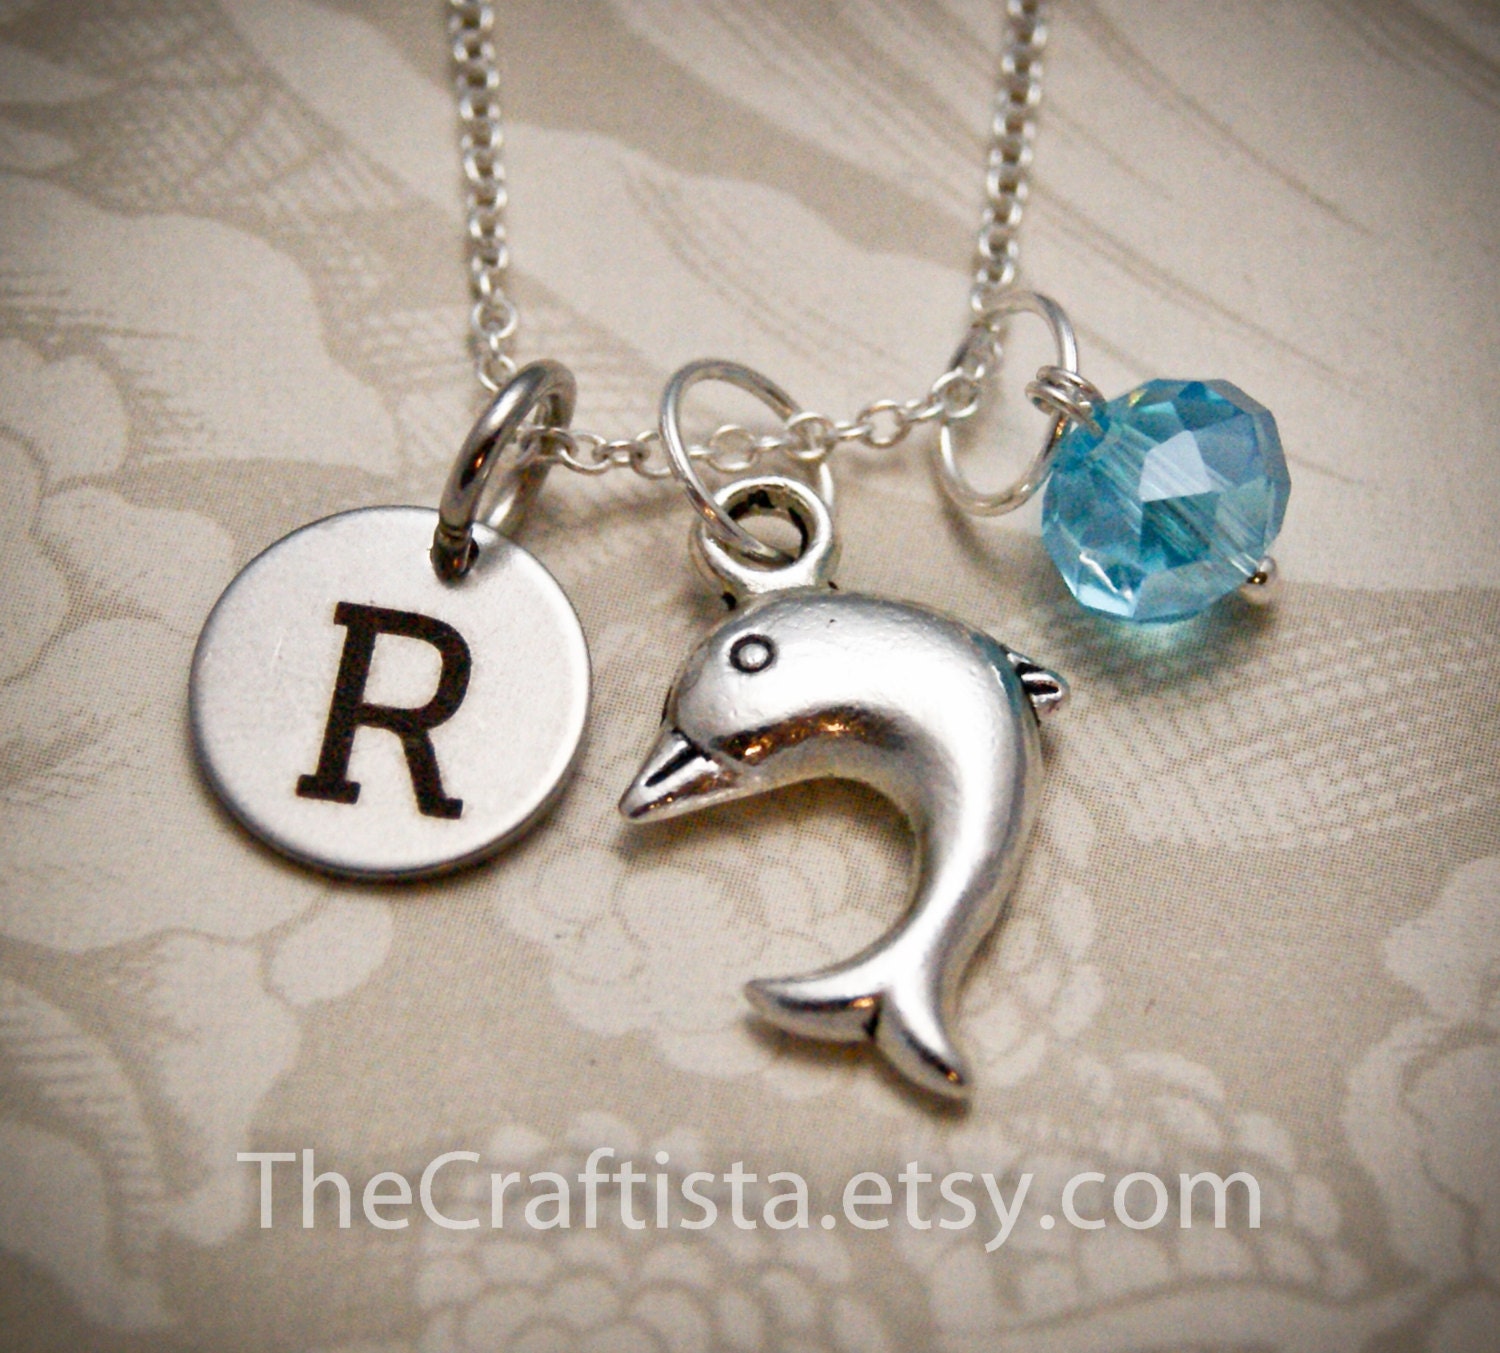 Personalized Dolphin Necklace With Initial Charm & Birthstone, Necklace, Charm, Pendant, Mascot